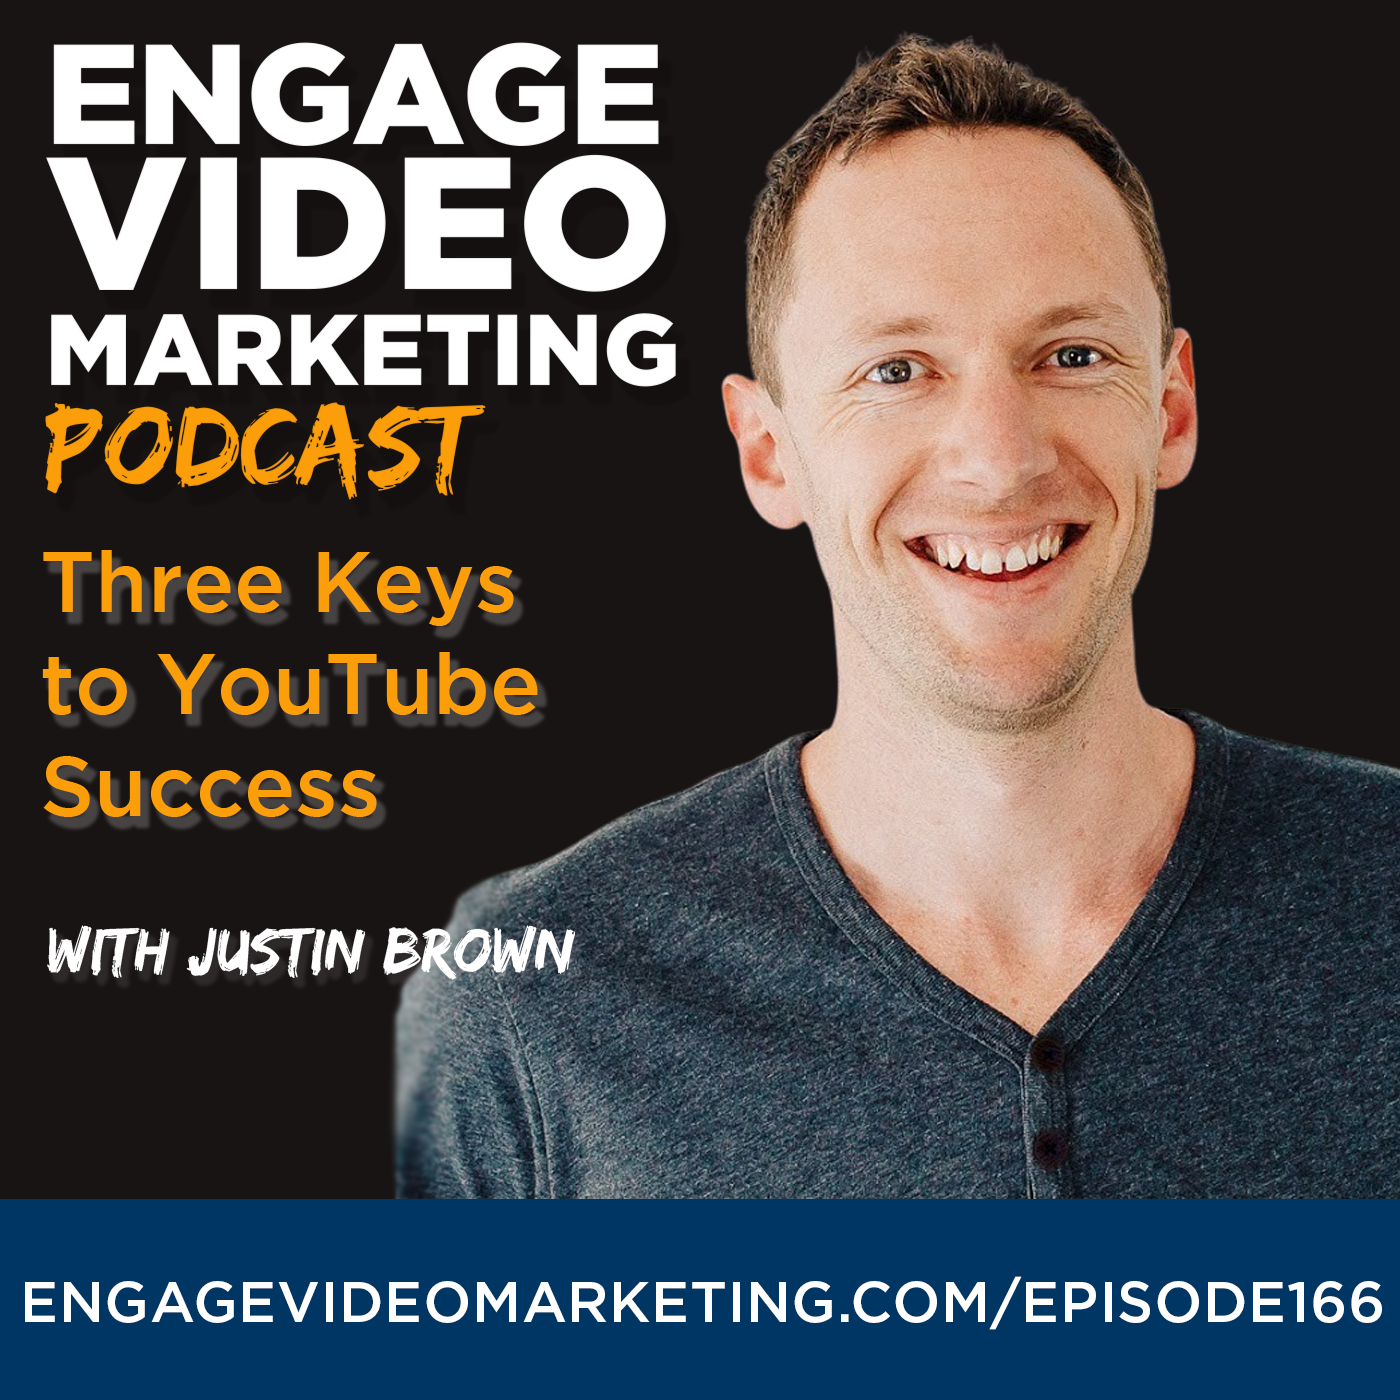 Three Keys to YouTube Success with Justin Brown